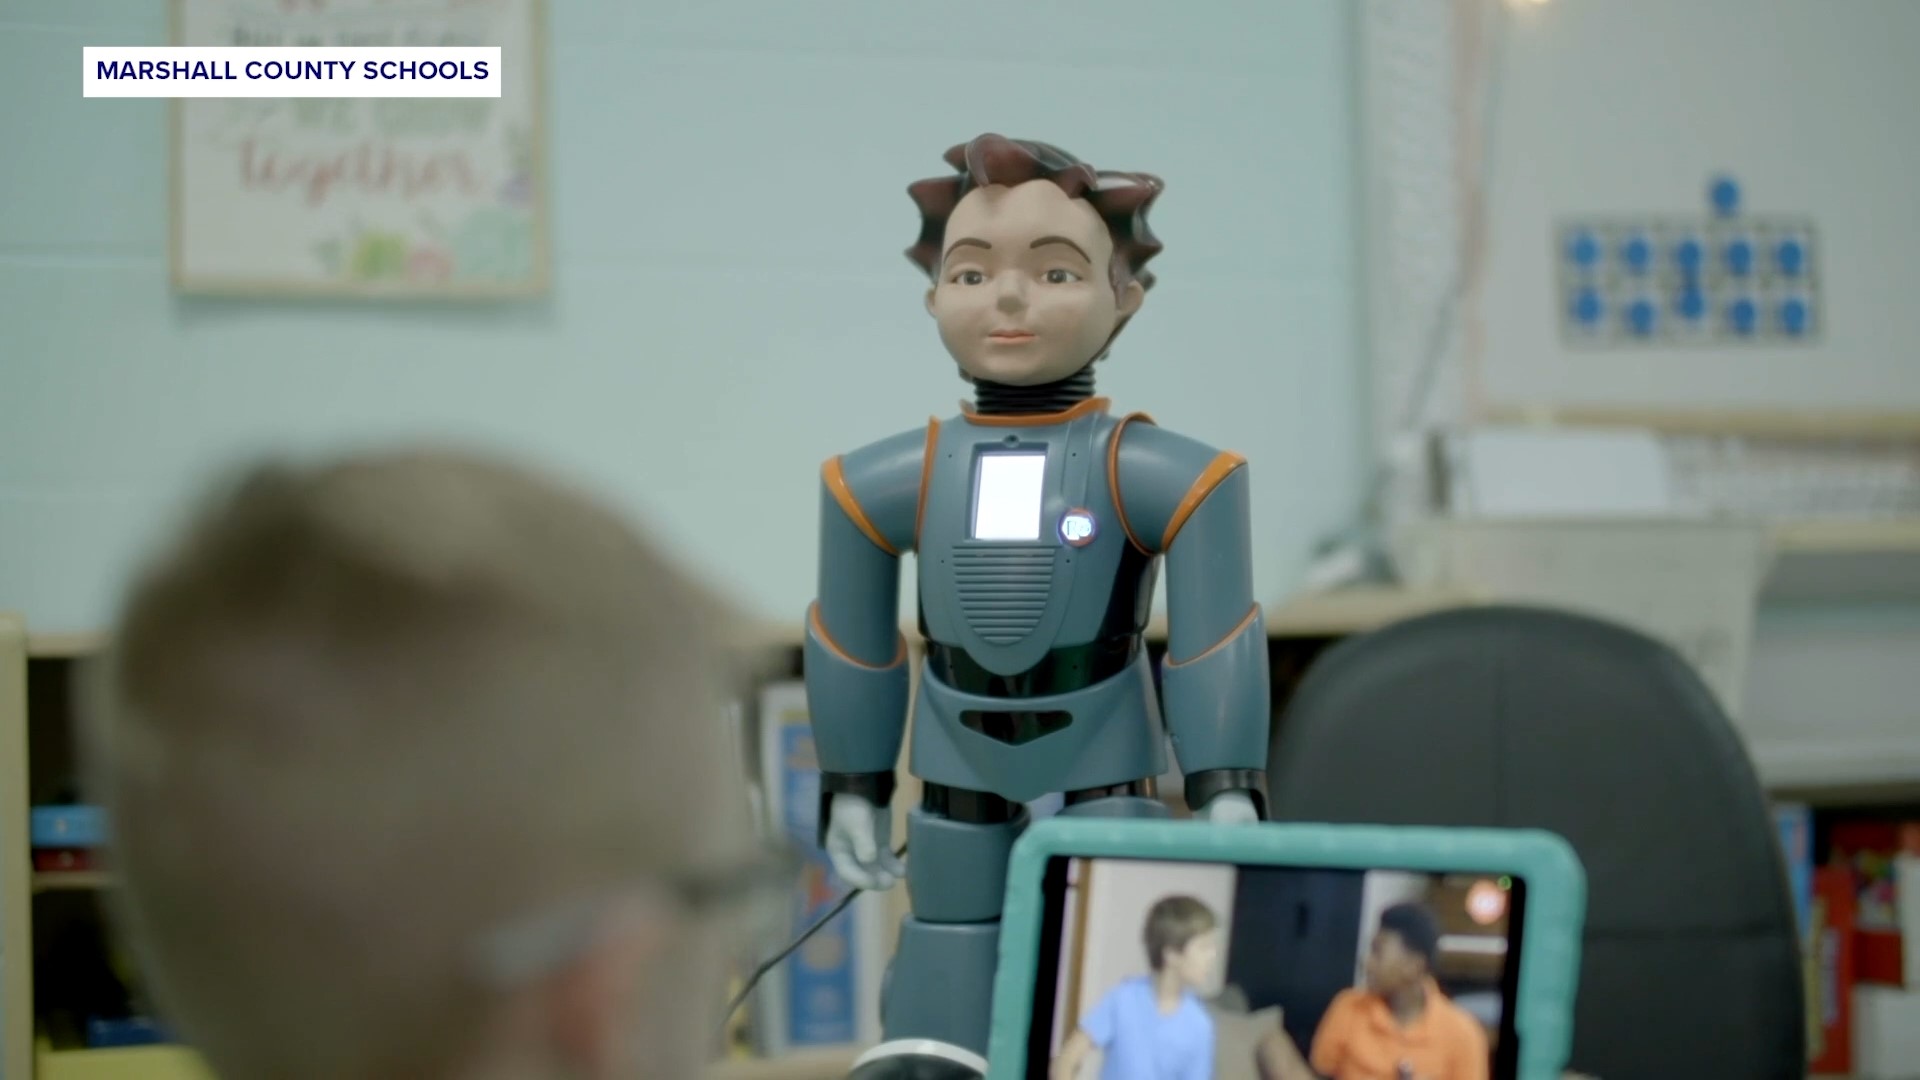 Milo was developed by RoboKind, and is intended to help kids on the autism spectrum develop social and developmental skills necessary to learn.